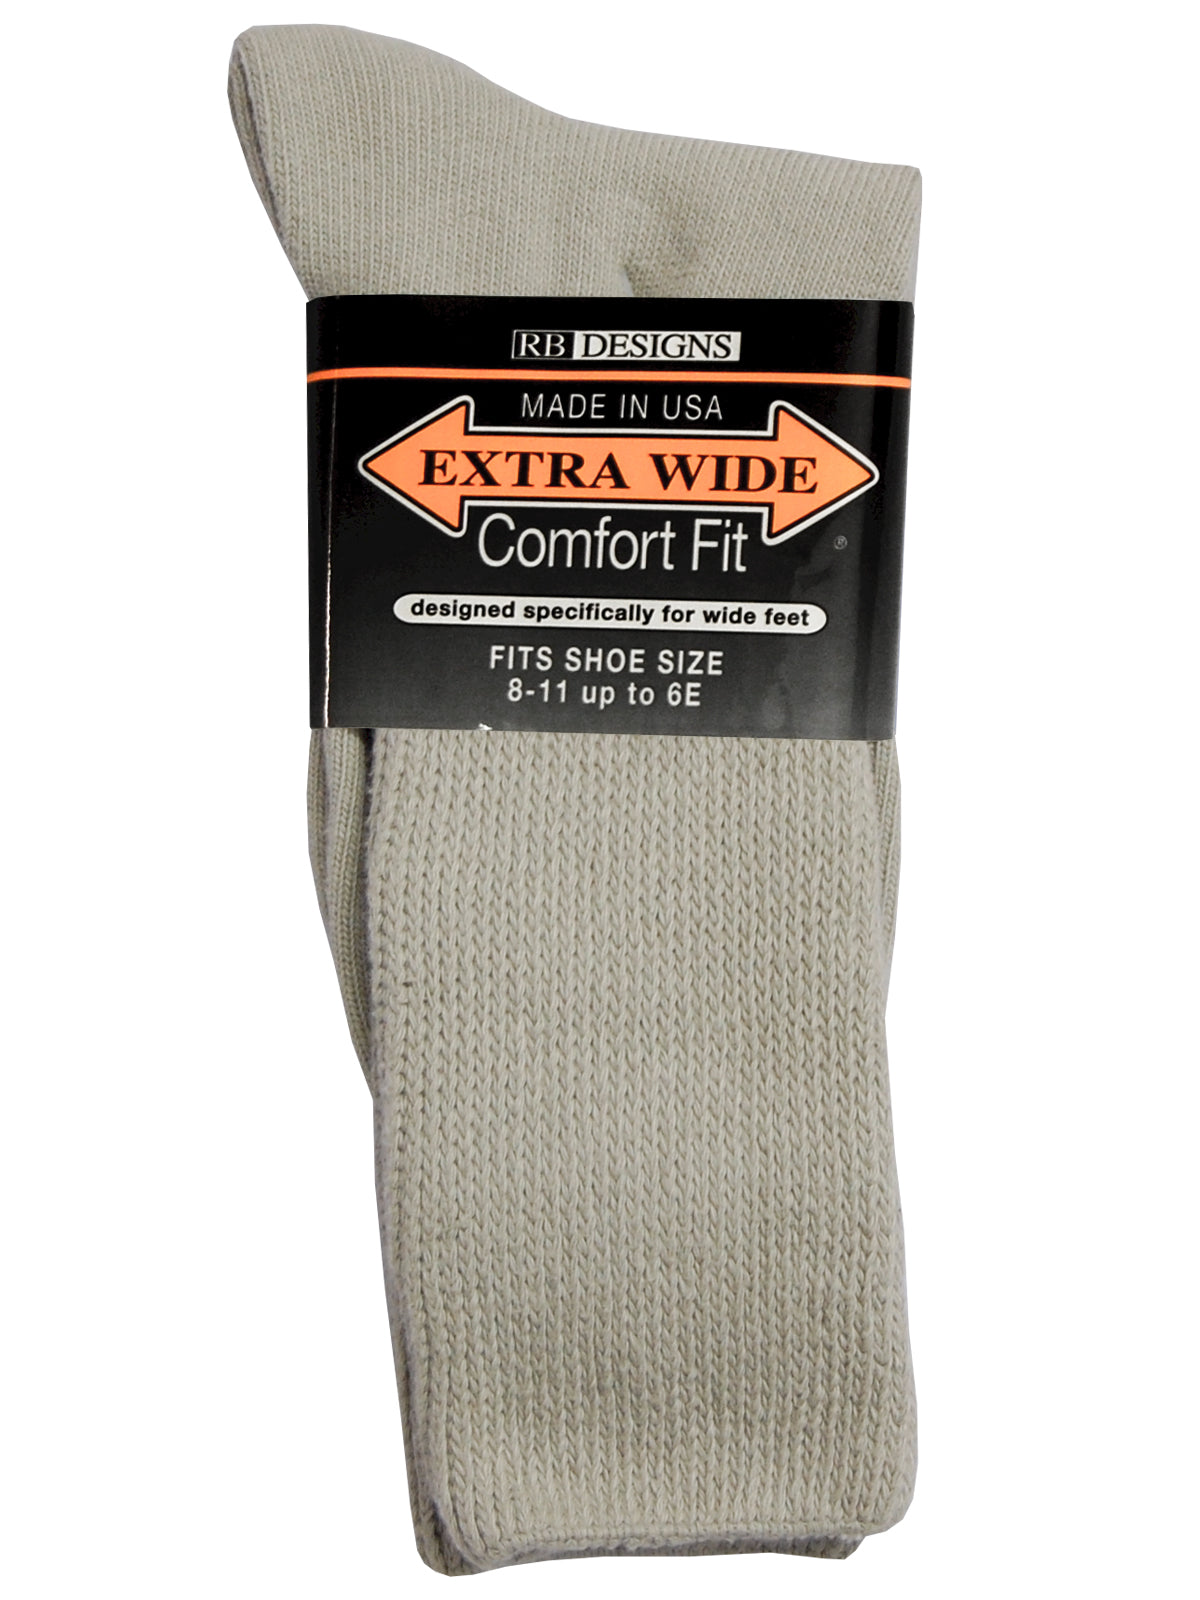 Extra Wide Men's Comfort Fit Athletic Crew Socks in Tan - Size Large (12 - 16)